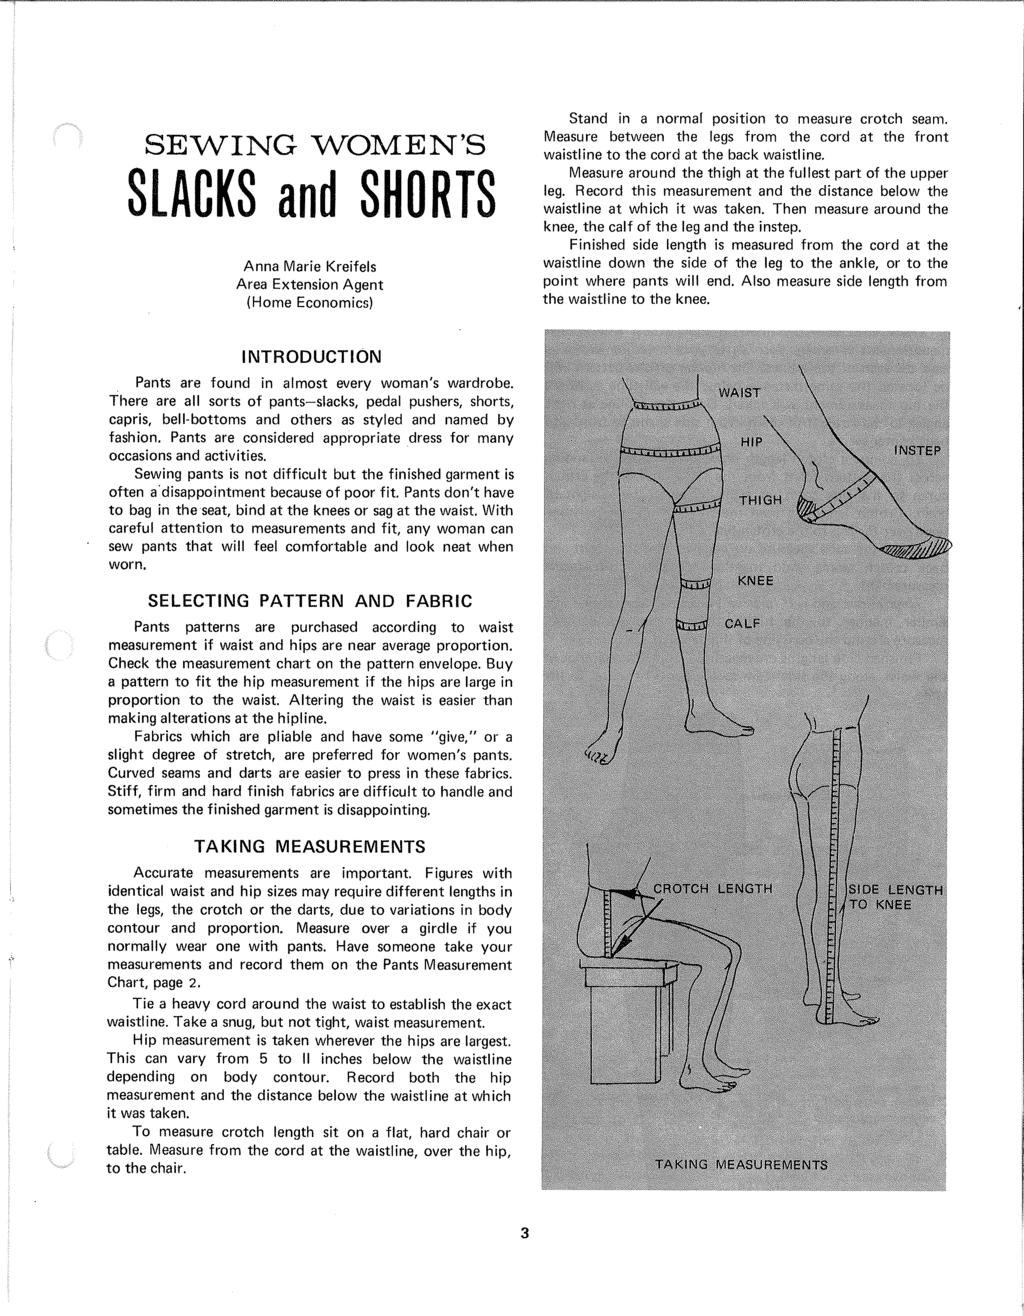 SEVVING WOMEN'S SLACKS and SHORTS Anna Marie Kreifels Area Extension Agent (Home Economics) Stand in a normal position to measure crotch seam.